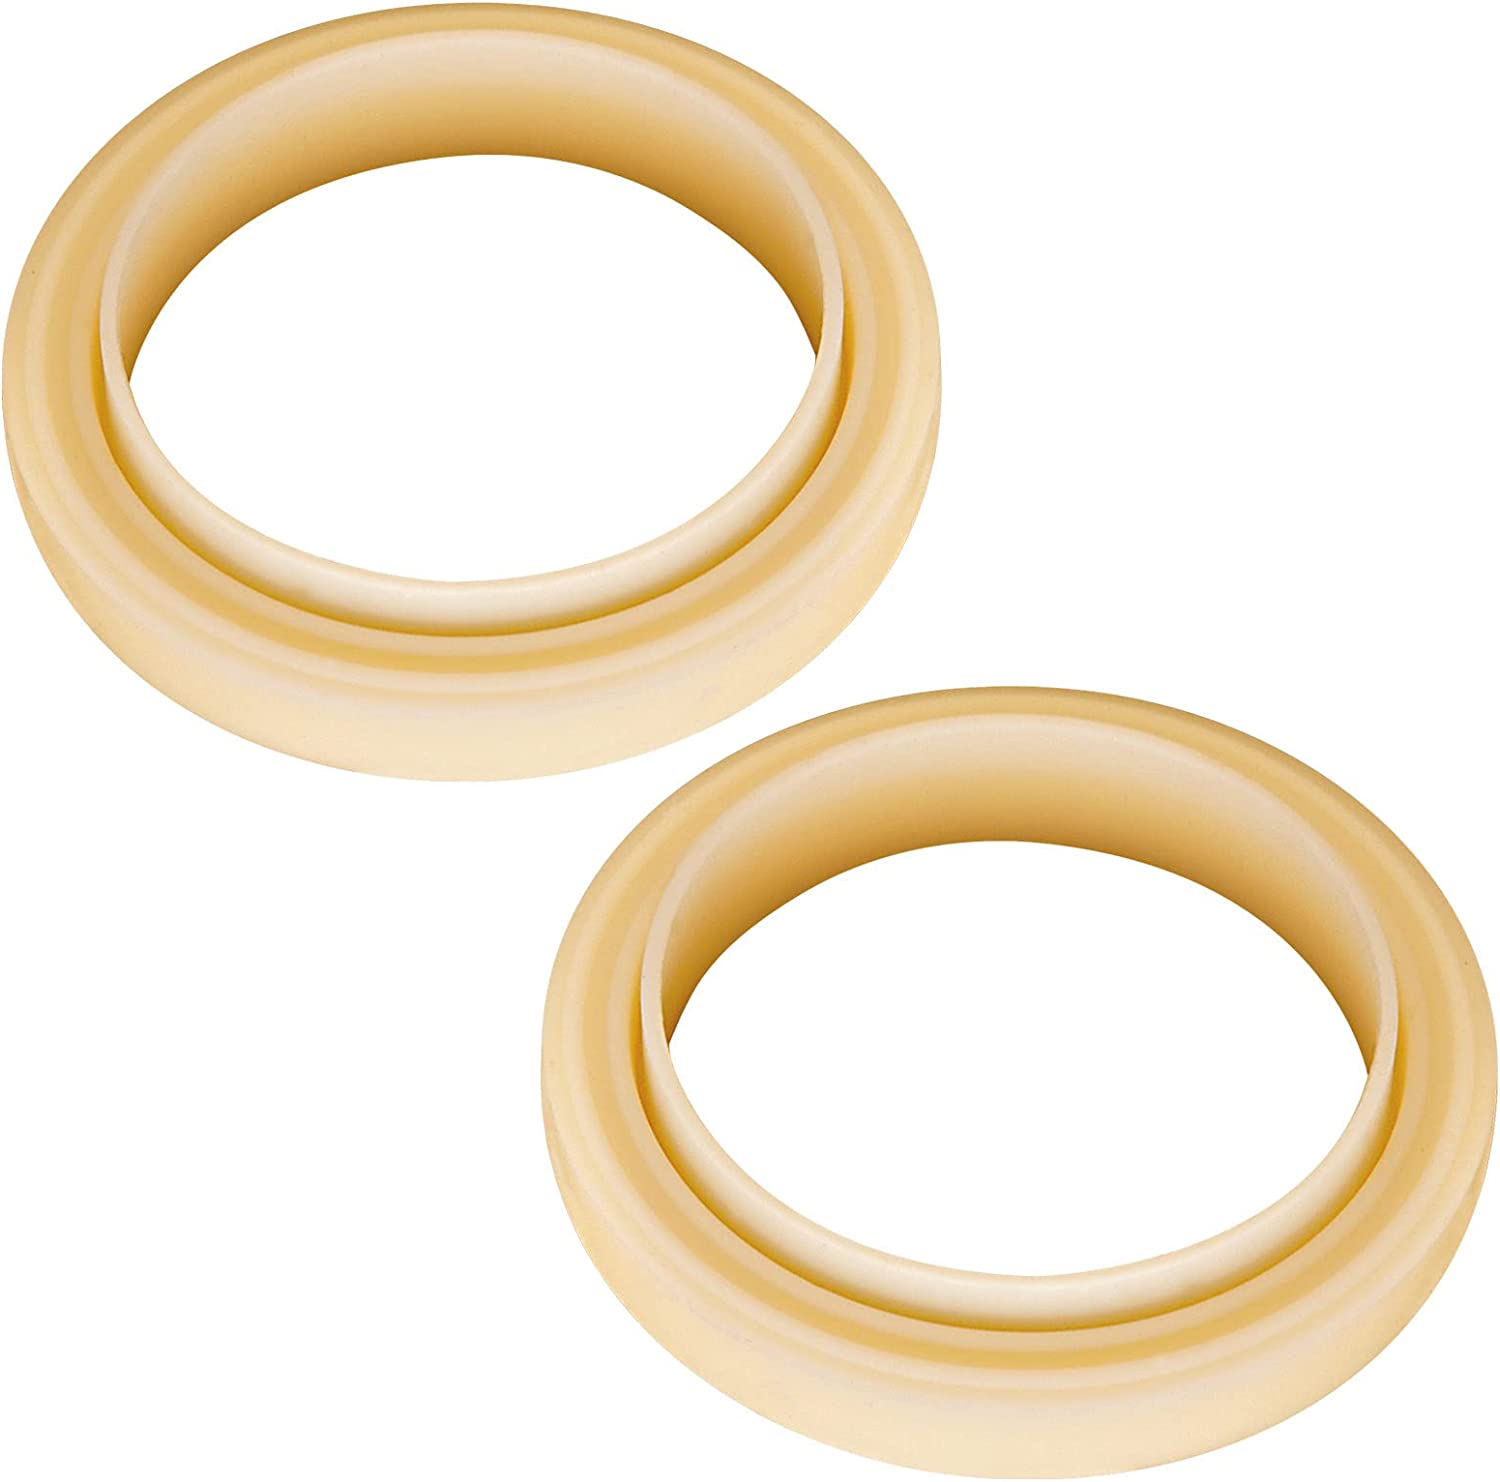 Coffee Machine Gasket Set - 54 mm Silicone Head Gasket Compatible with Sage The Barista Express BES875UK SES875BKS SES875 SES875BTR2GUK1 (Pack of 2)